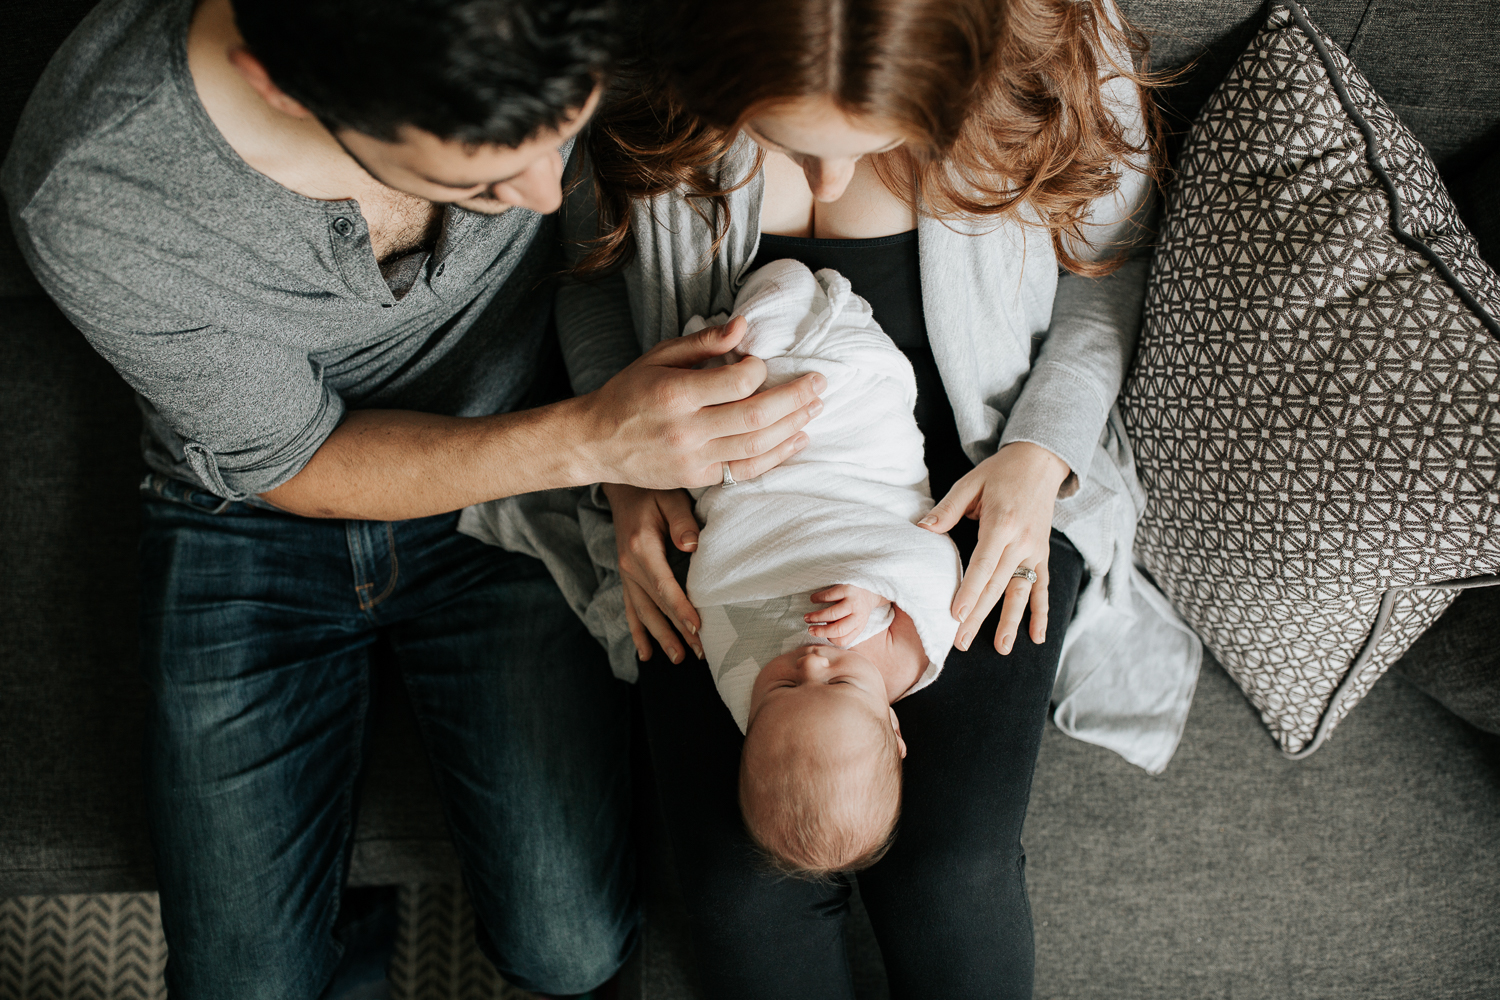 family of 3 sitting on living room couch, 2 week old baby boy lying in mom's lap, dad sitting next to them with hand on son - York Region Lifestyle Photography